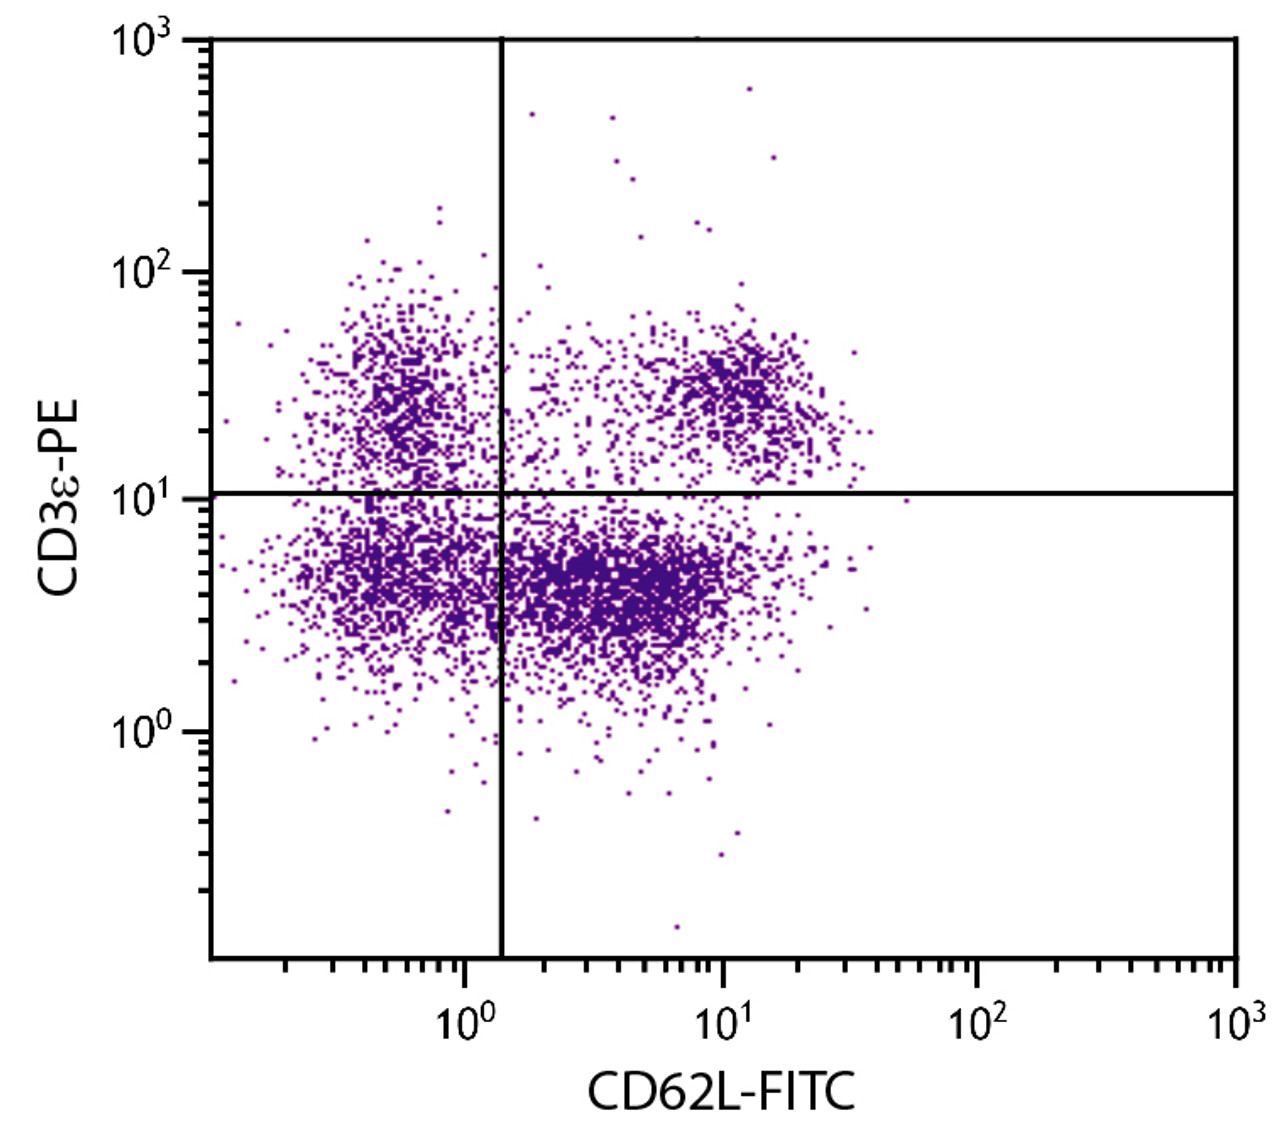 BALB/c mouse splenocytes were stained with Rat Anti-Mouse CD62L-FITC (Cat. No. 98-819) and Rat Anti-Mouse CD3?-PE .